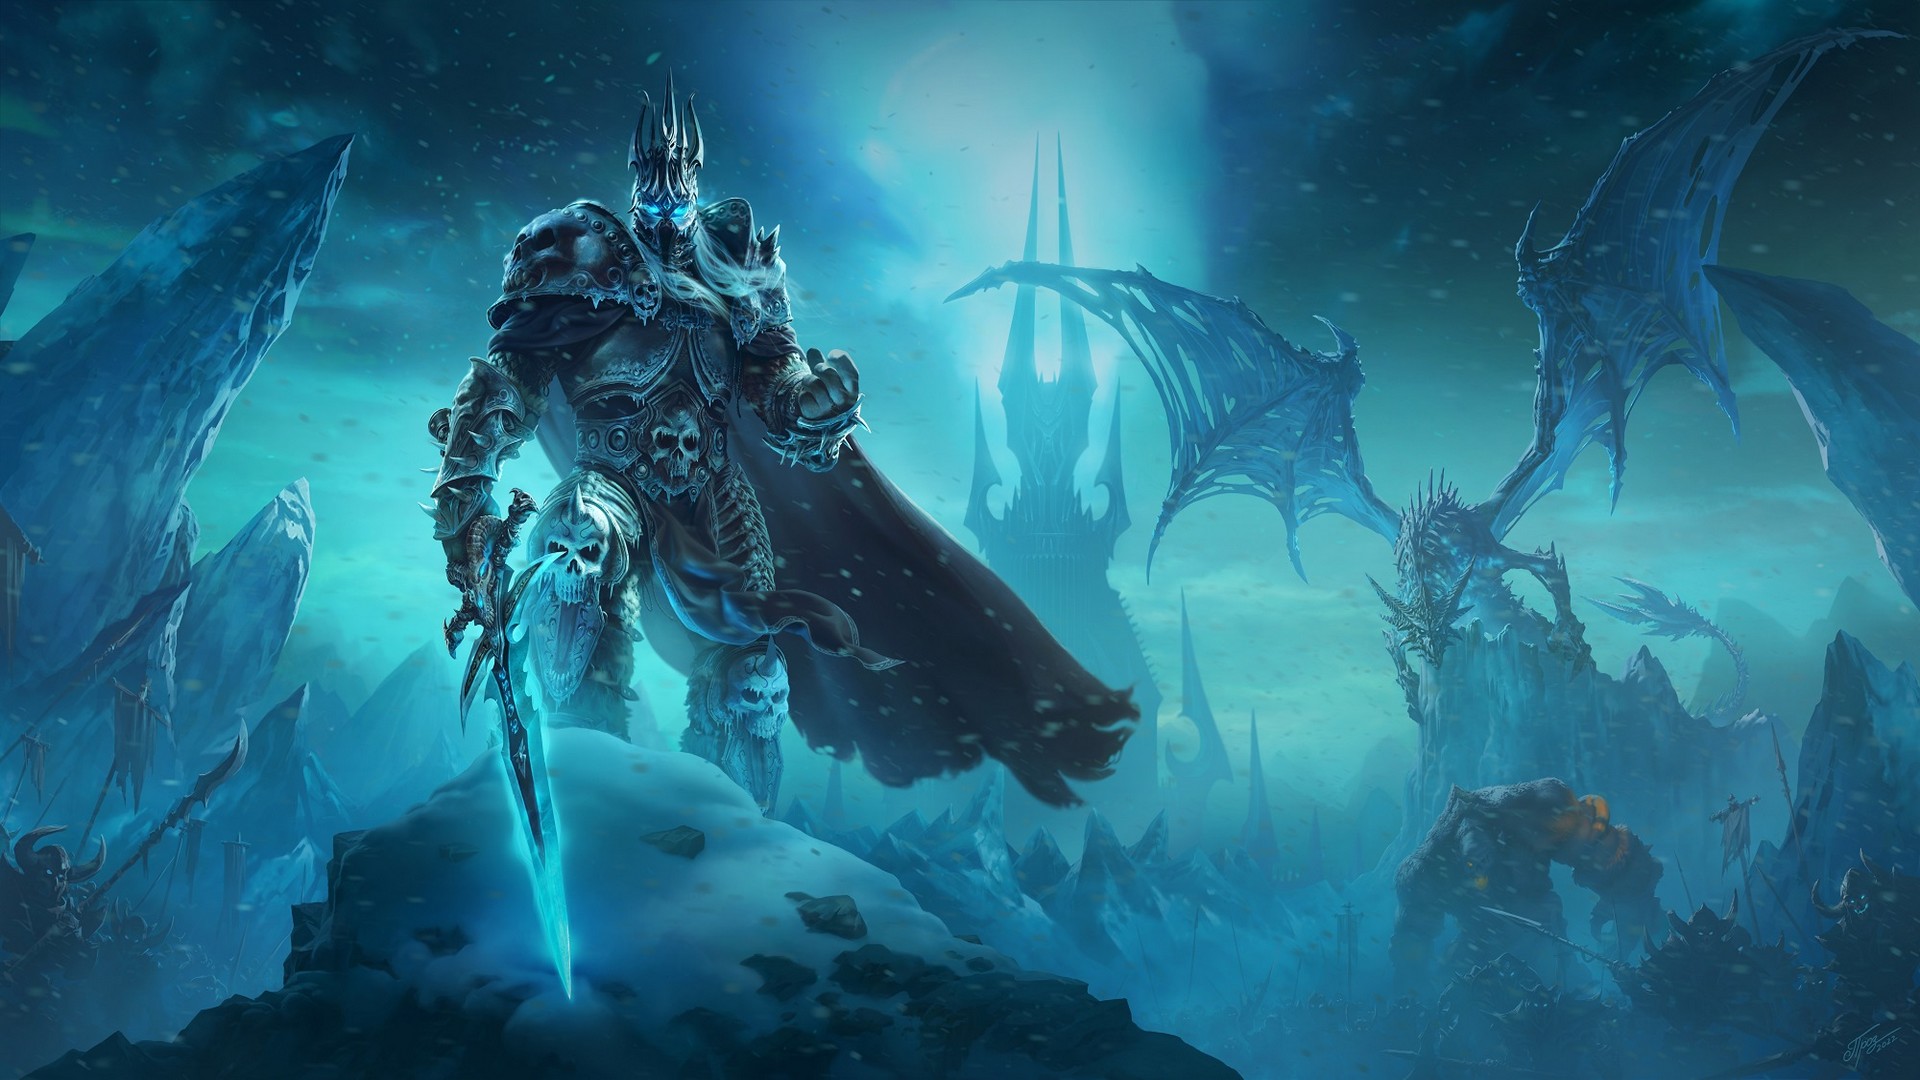 Brave The Frozen North In World Of Warcraft: Wrath Of The Lich King Classic – Live Now